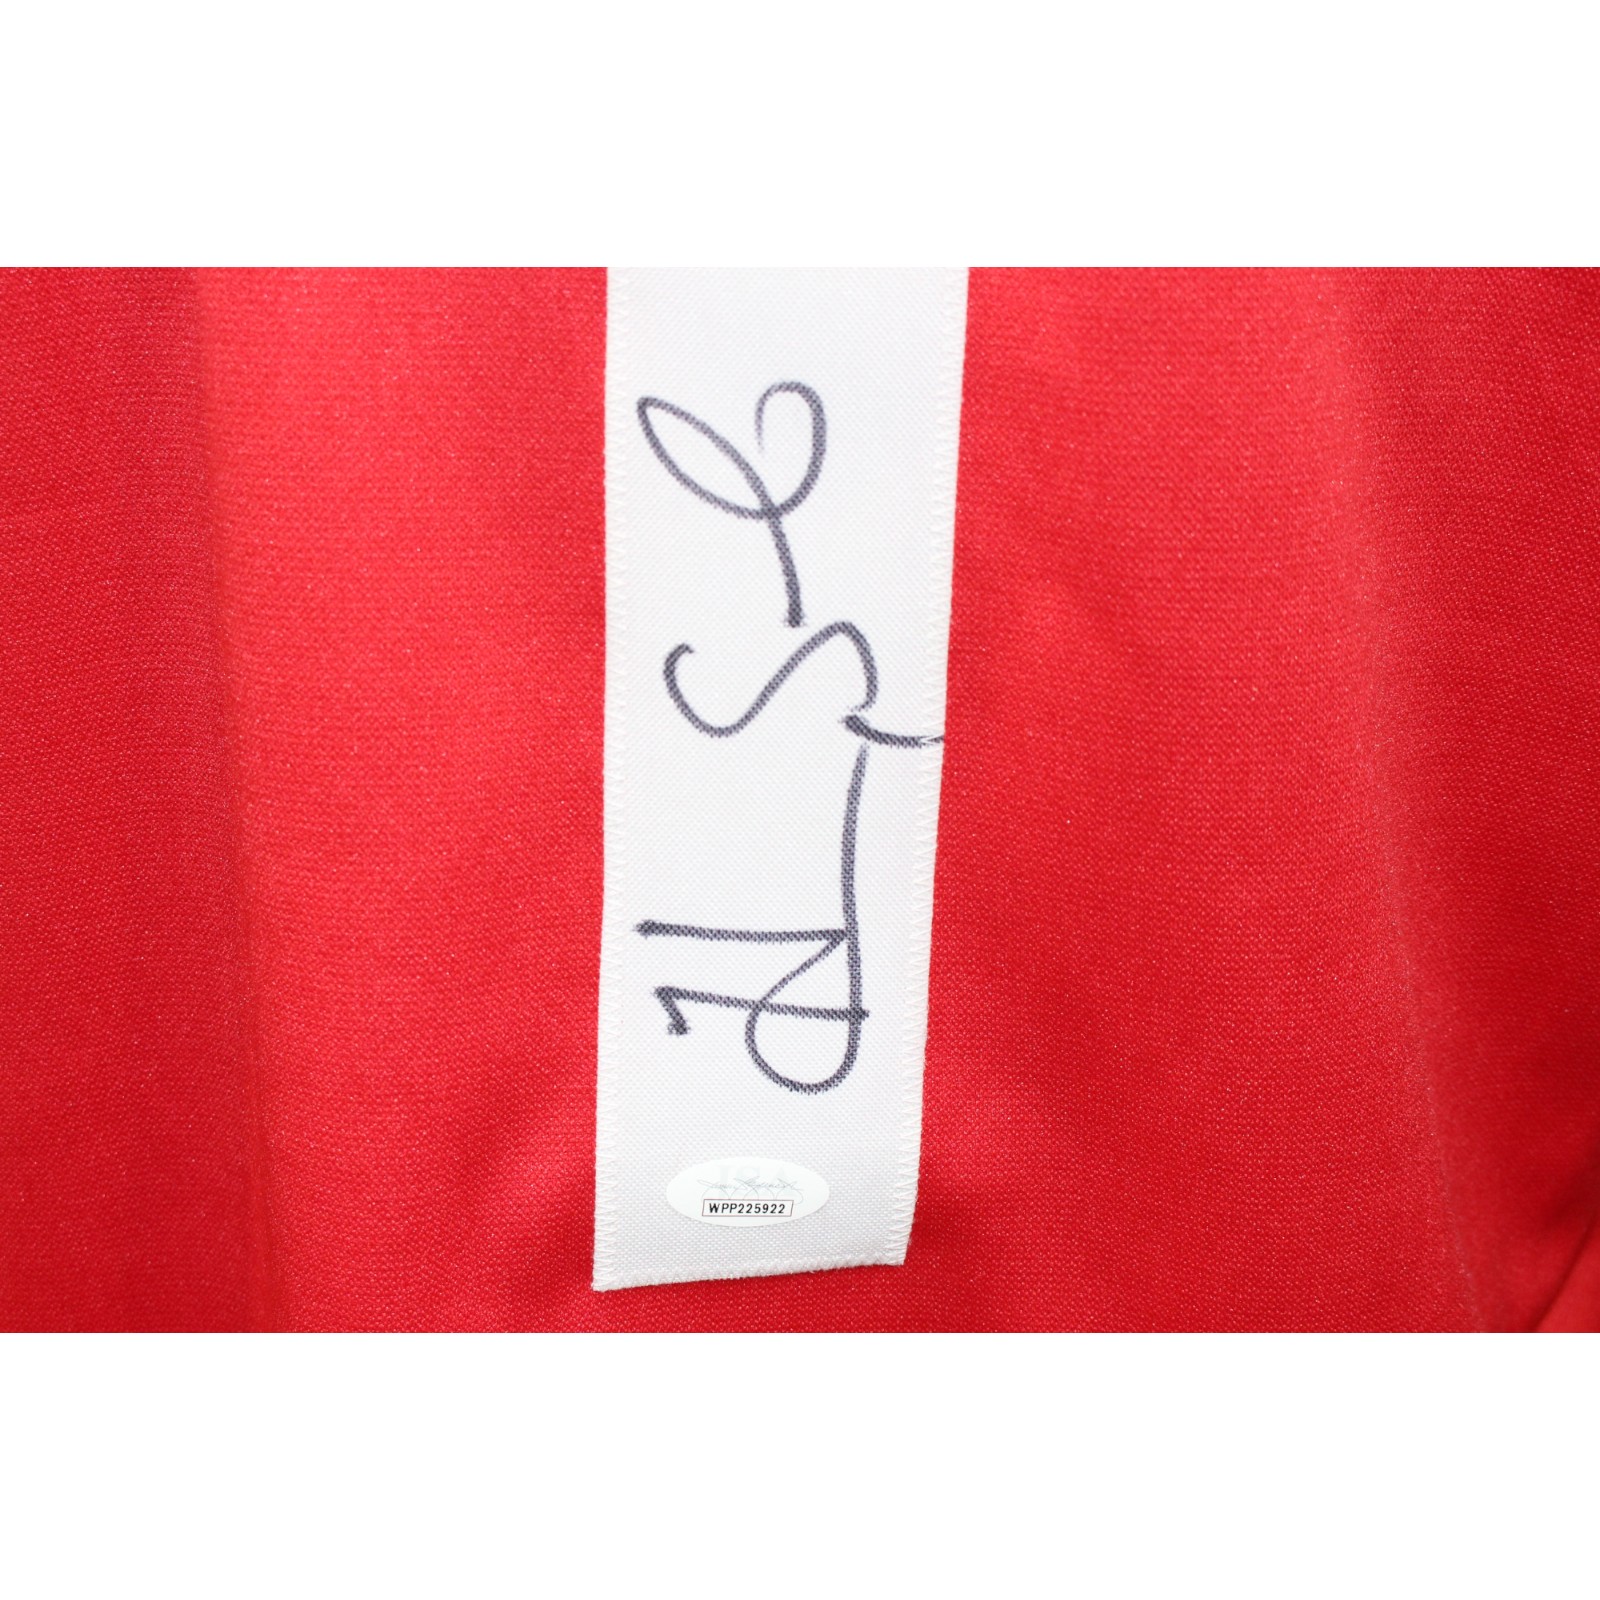 Hope Solo Autographed/Signed National Style Red Jersey JSA